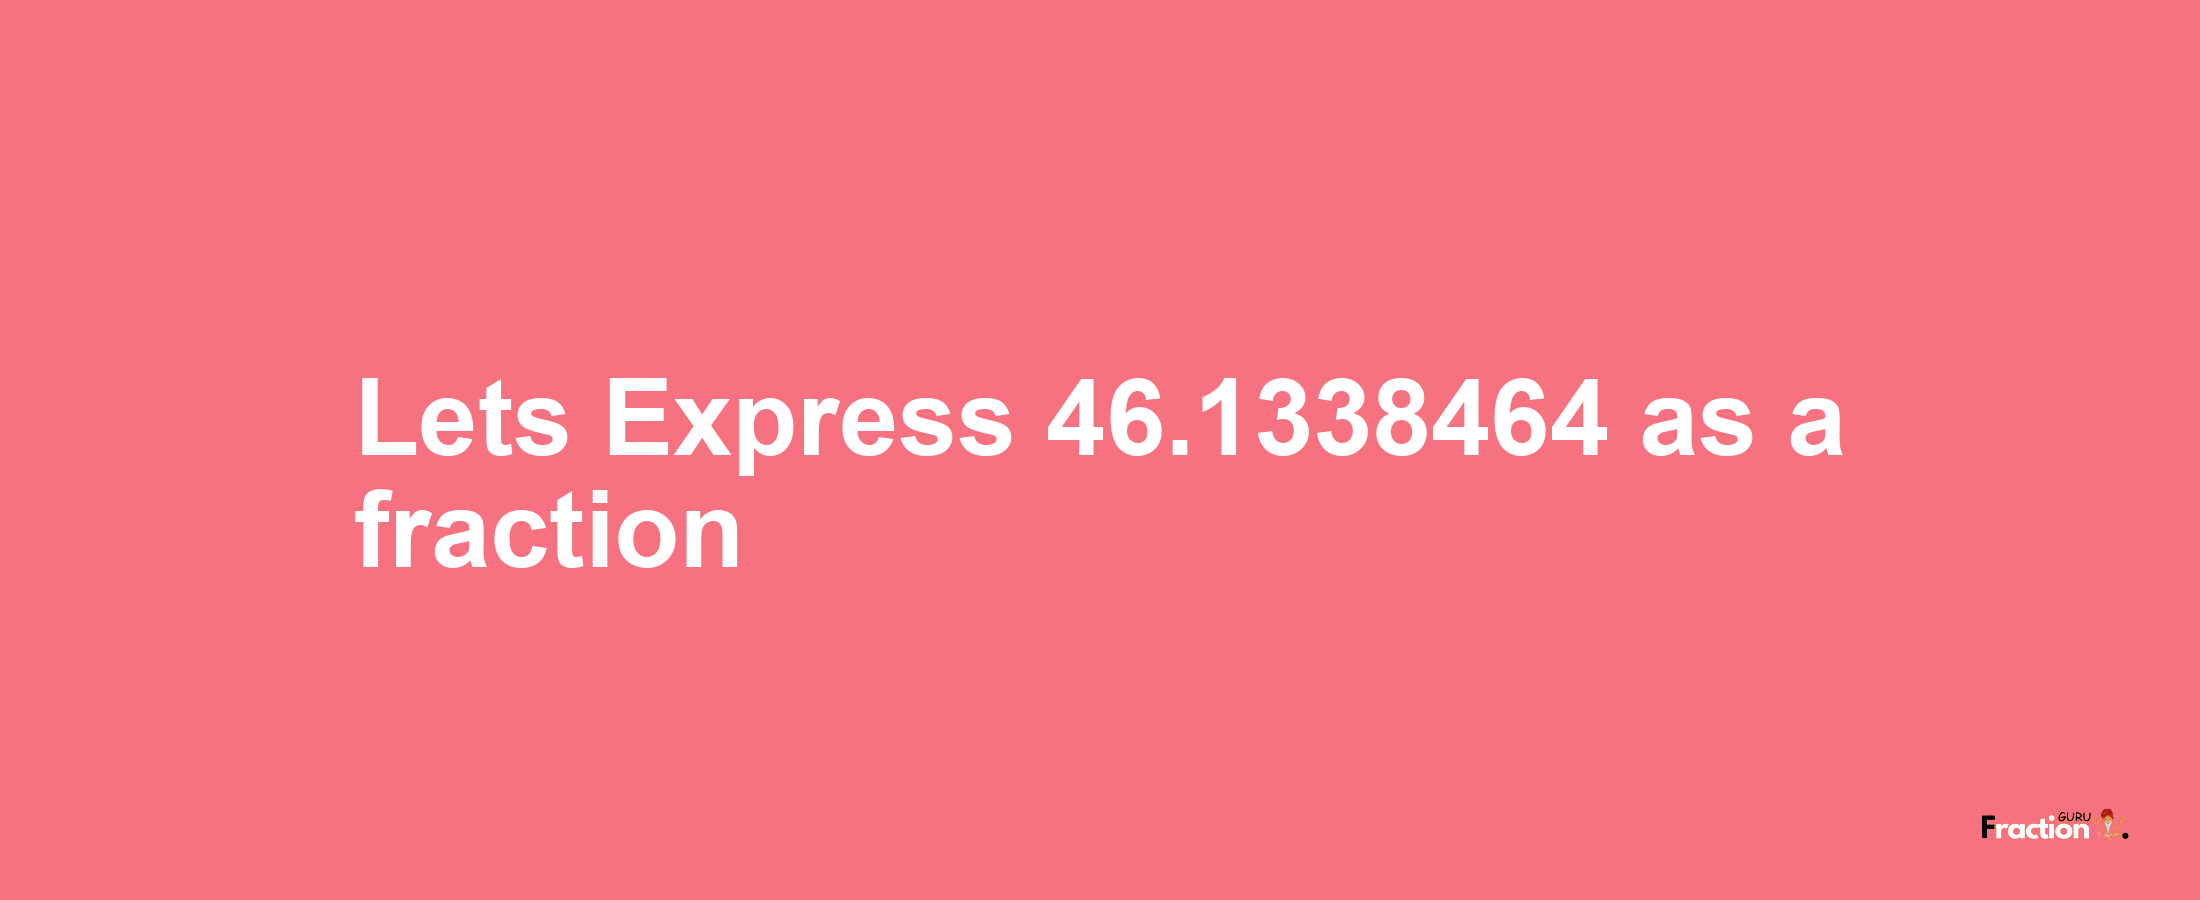 Lets Express 46.1338464 as afraction